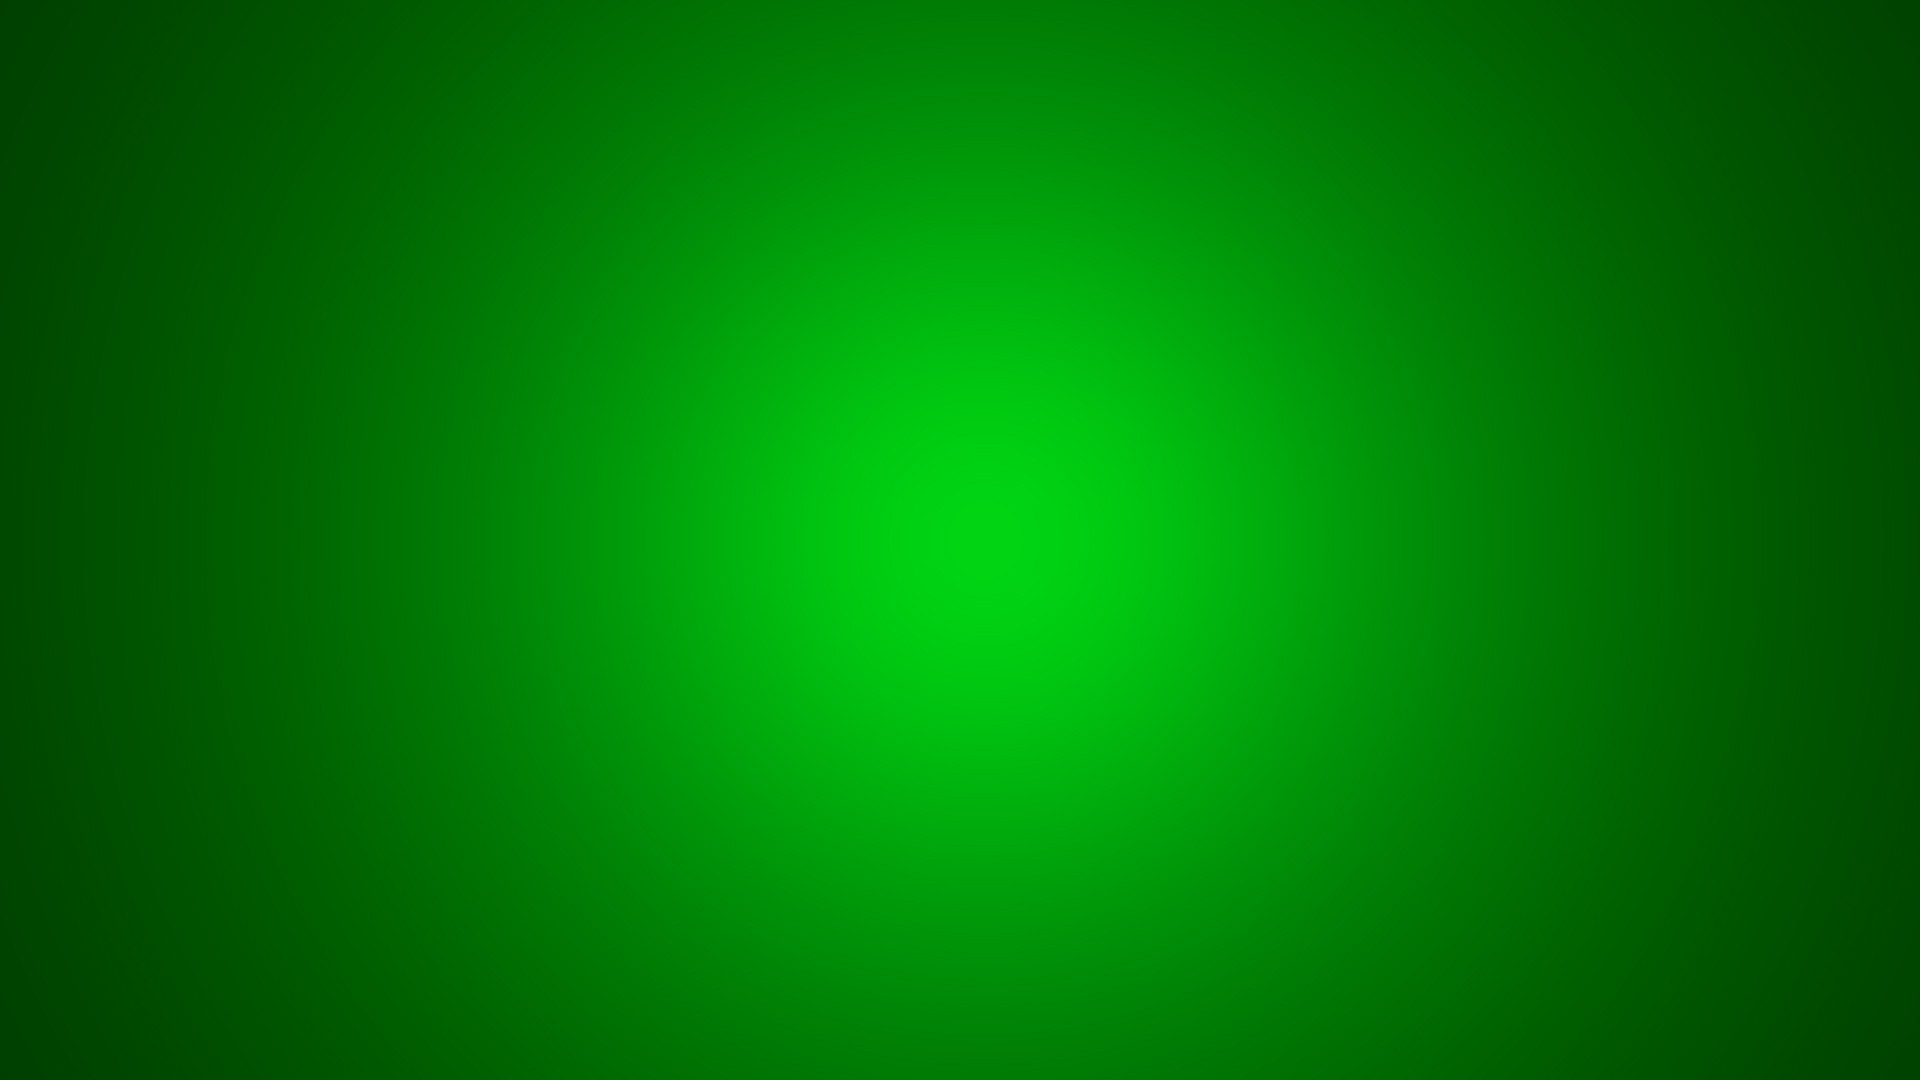 45 Hd Green Wallpapersbackgrounds For Free Download